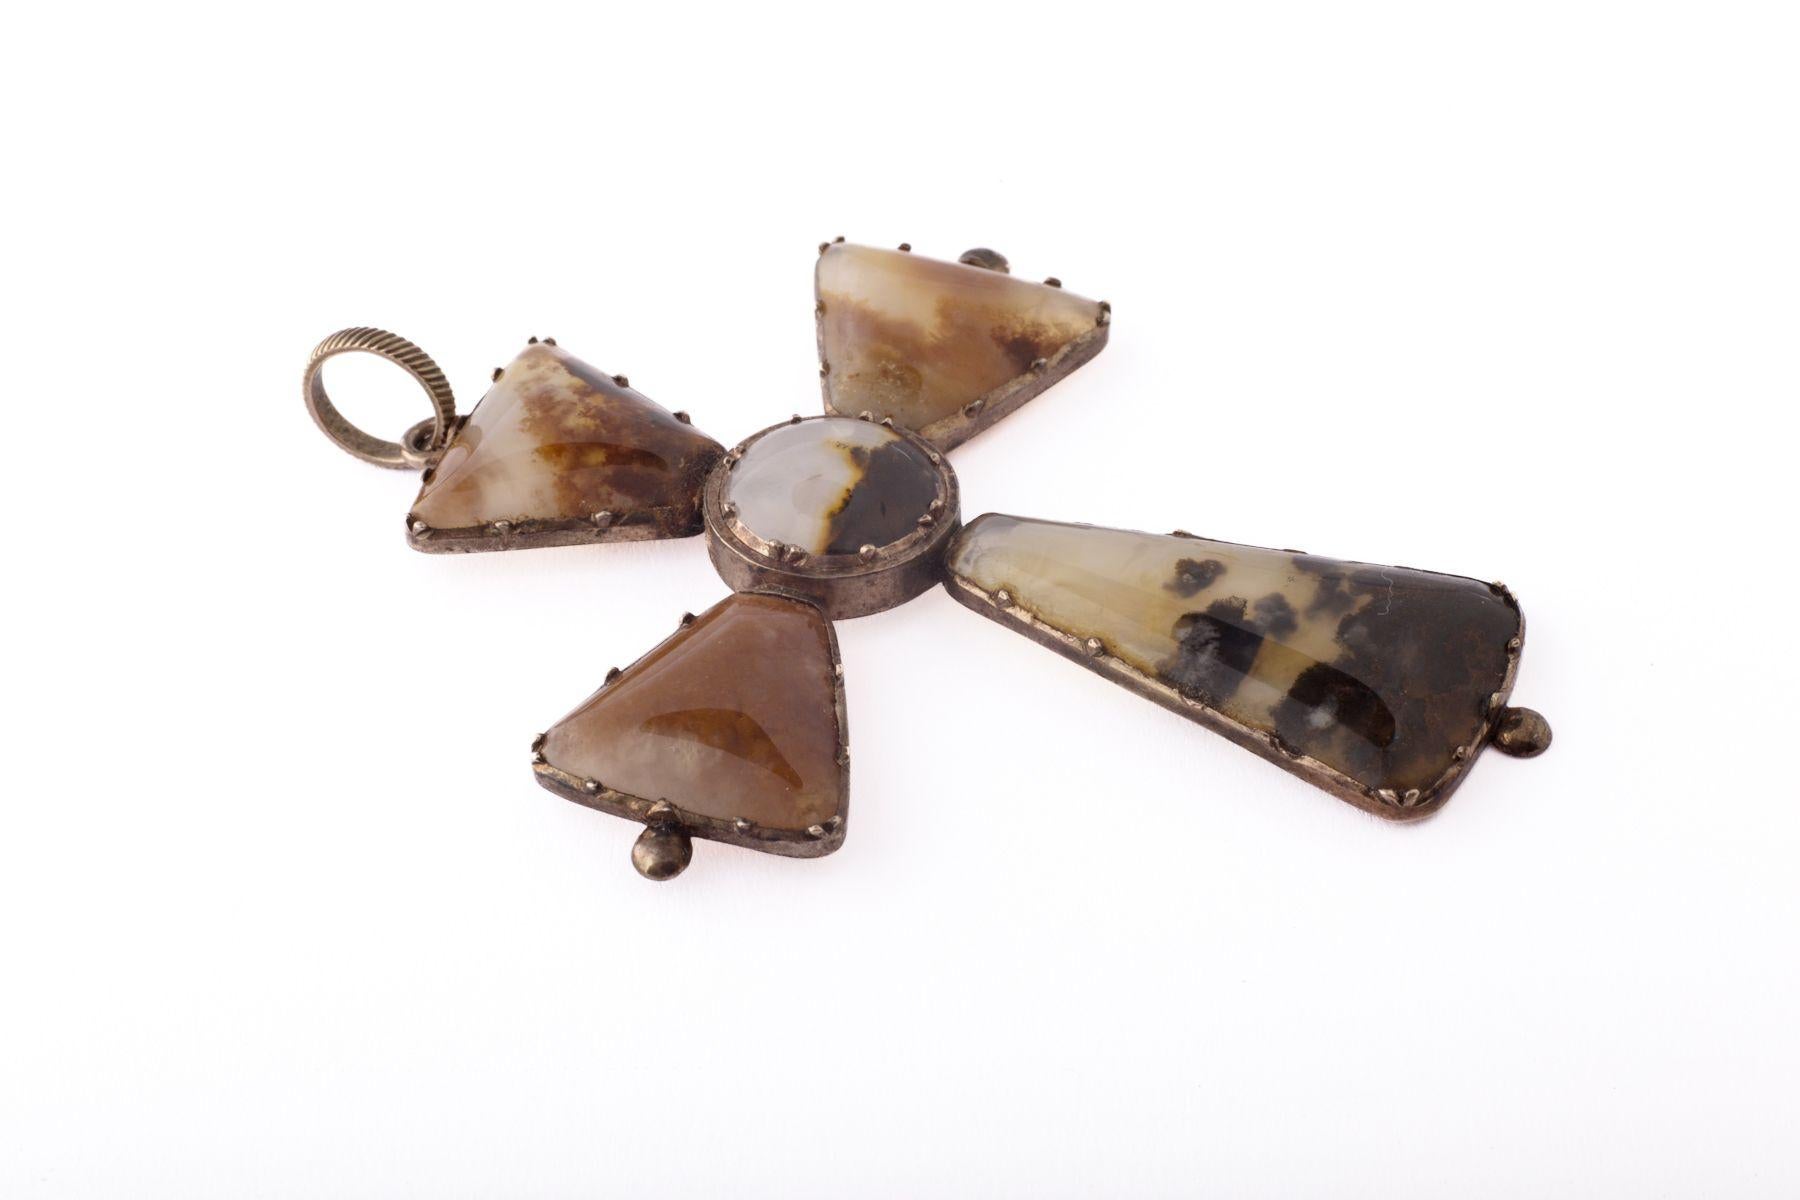 A gorgeous Scottish Victorian Landscape Agate cross shows how the hand of man can enhance a gift of nature. Translucent dendritic agates are cut into elongated triangles that are have a round center. The proportion is beautiful as are the neutral